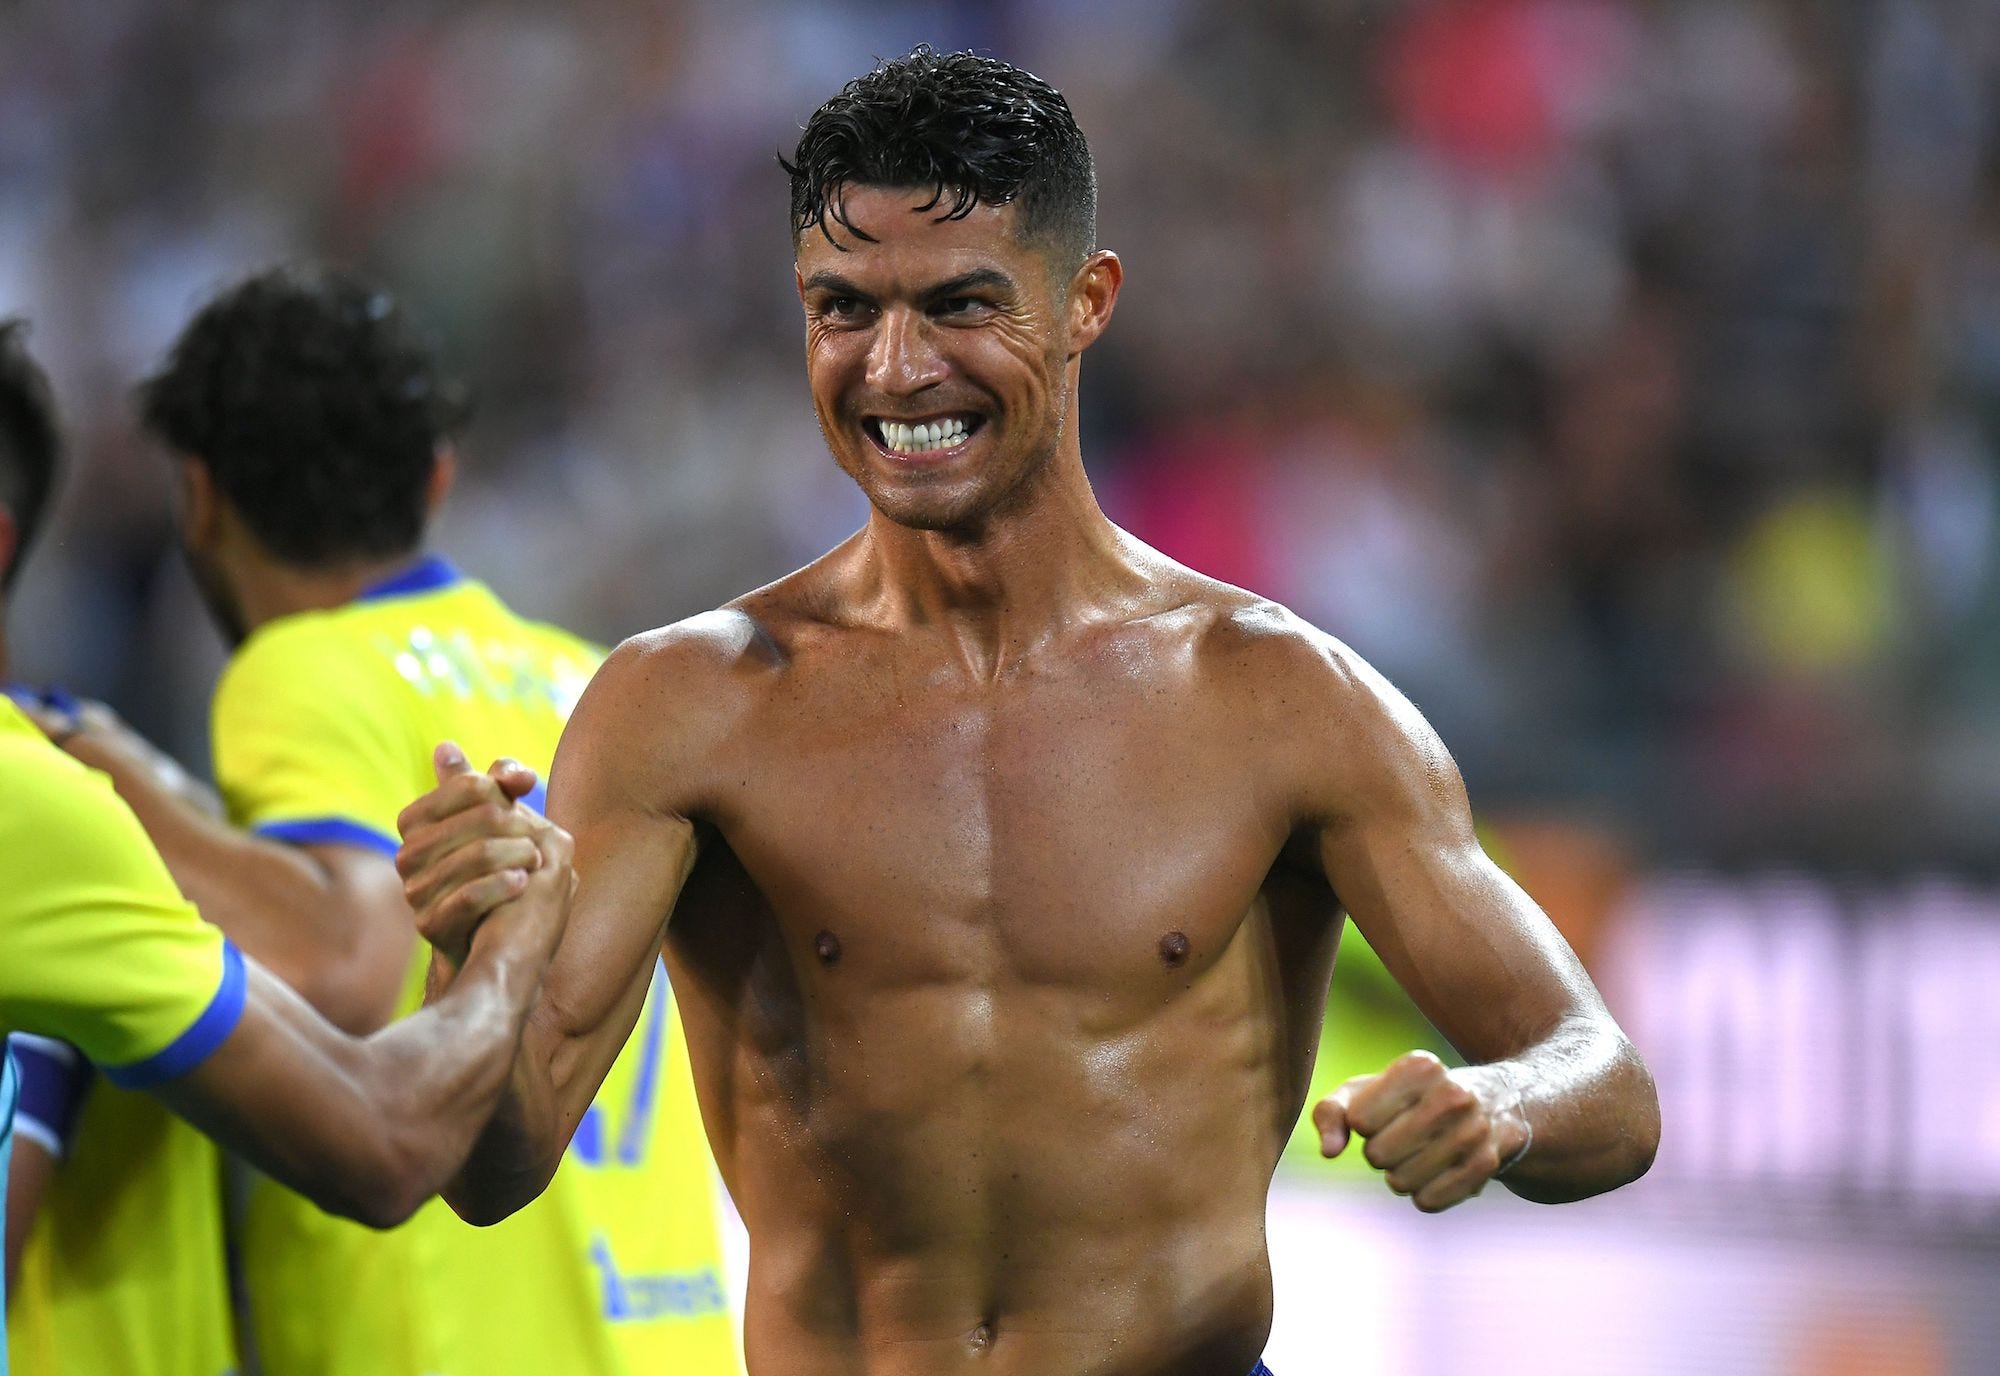 Cristiano Ronaldo of Juventus celebrates after scoring his team's third goal before the referee disallowed it during the Serie A match between Udinese Calcio v Juventus